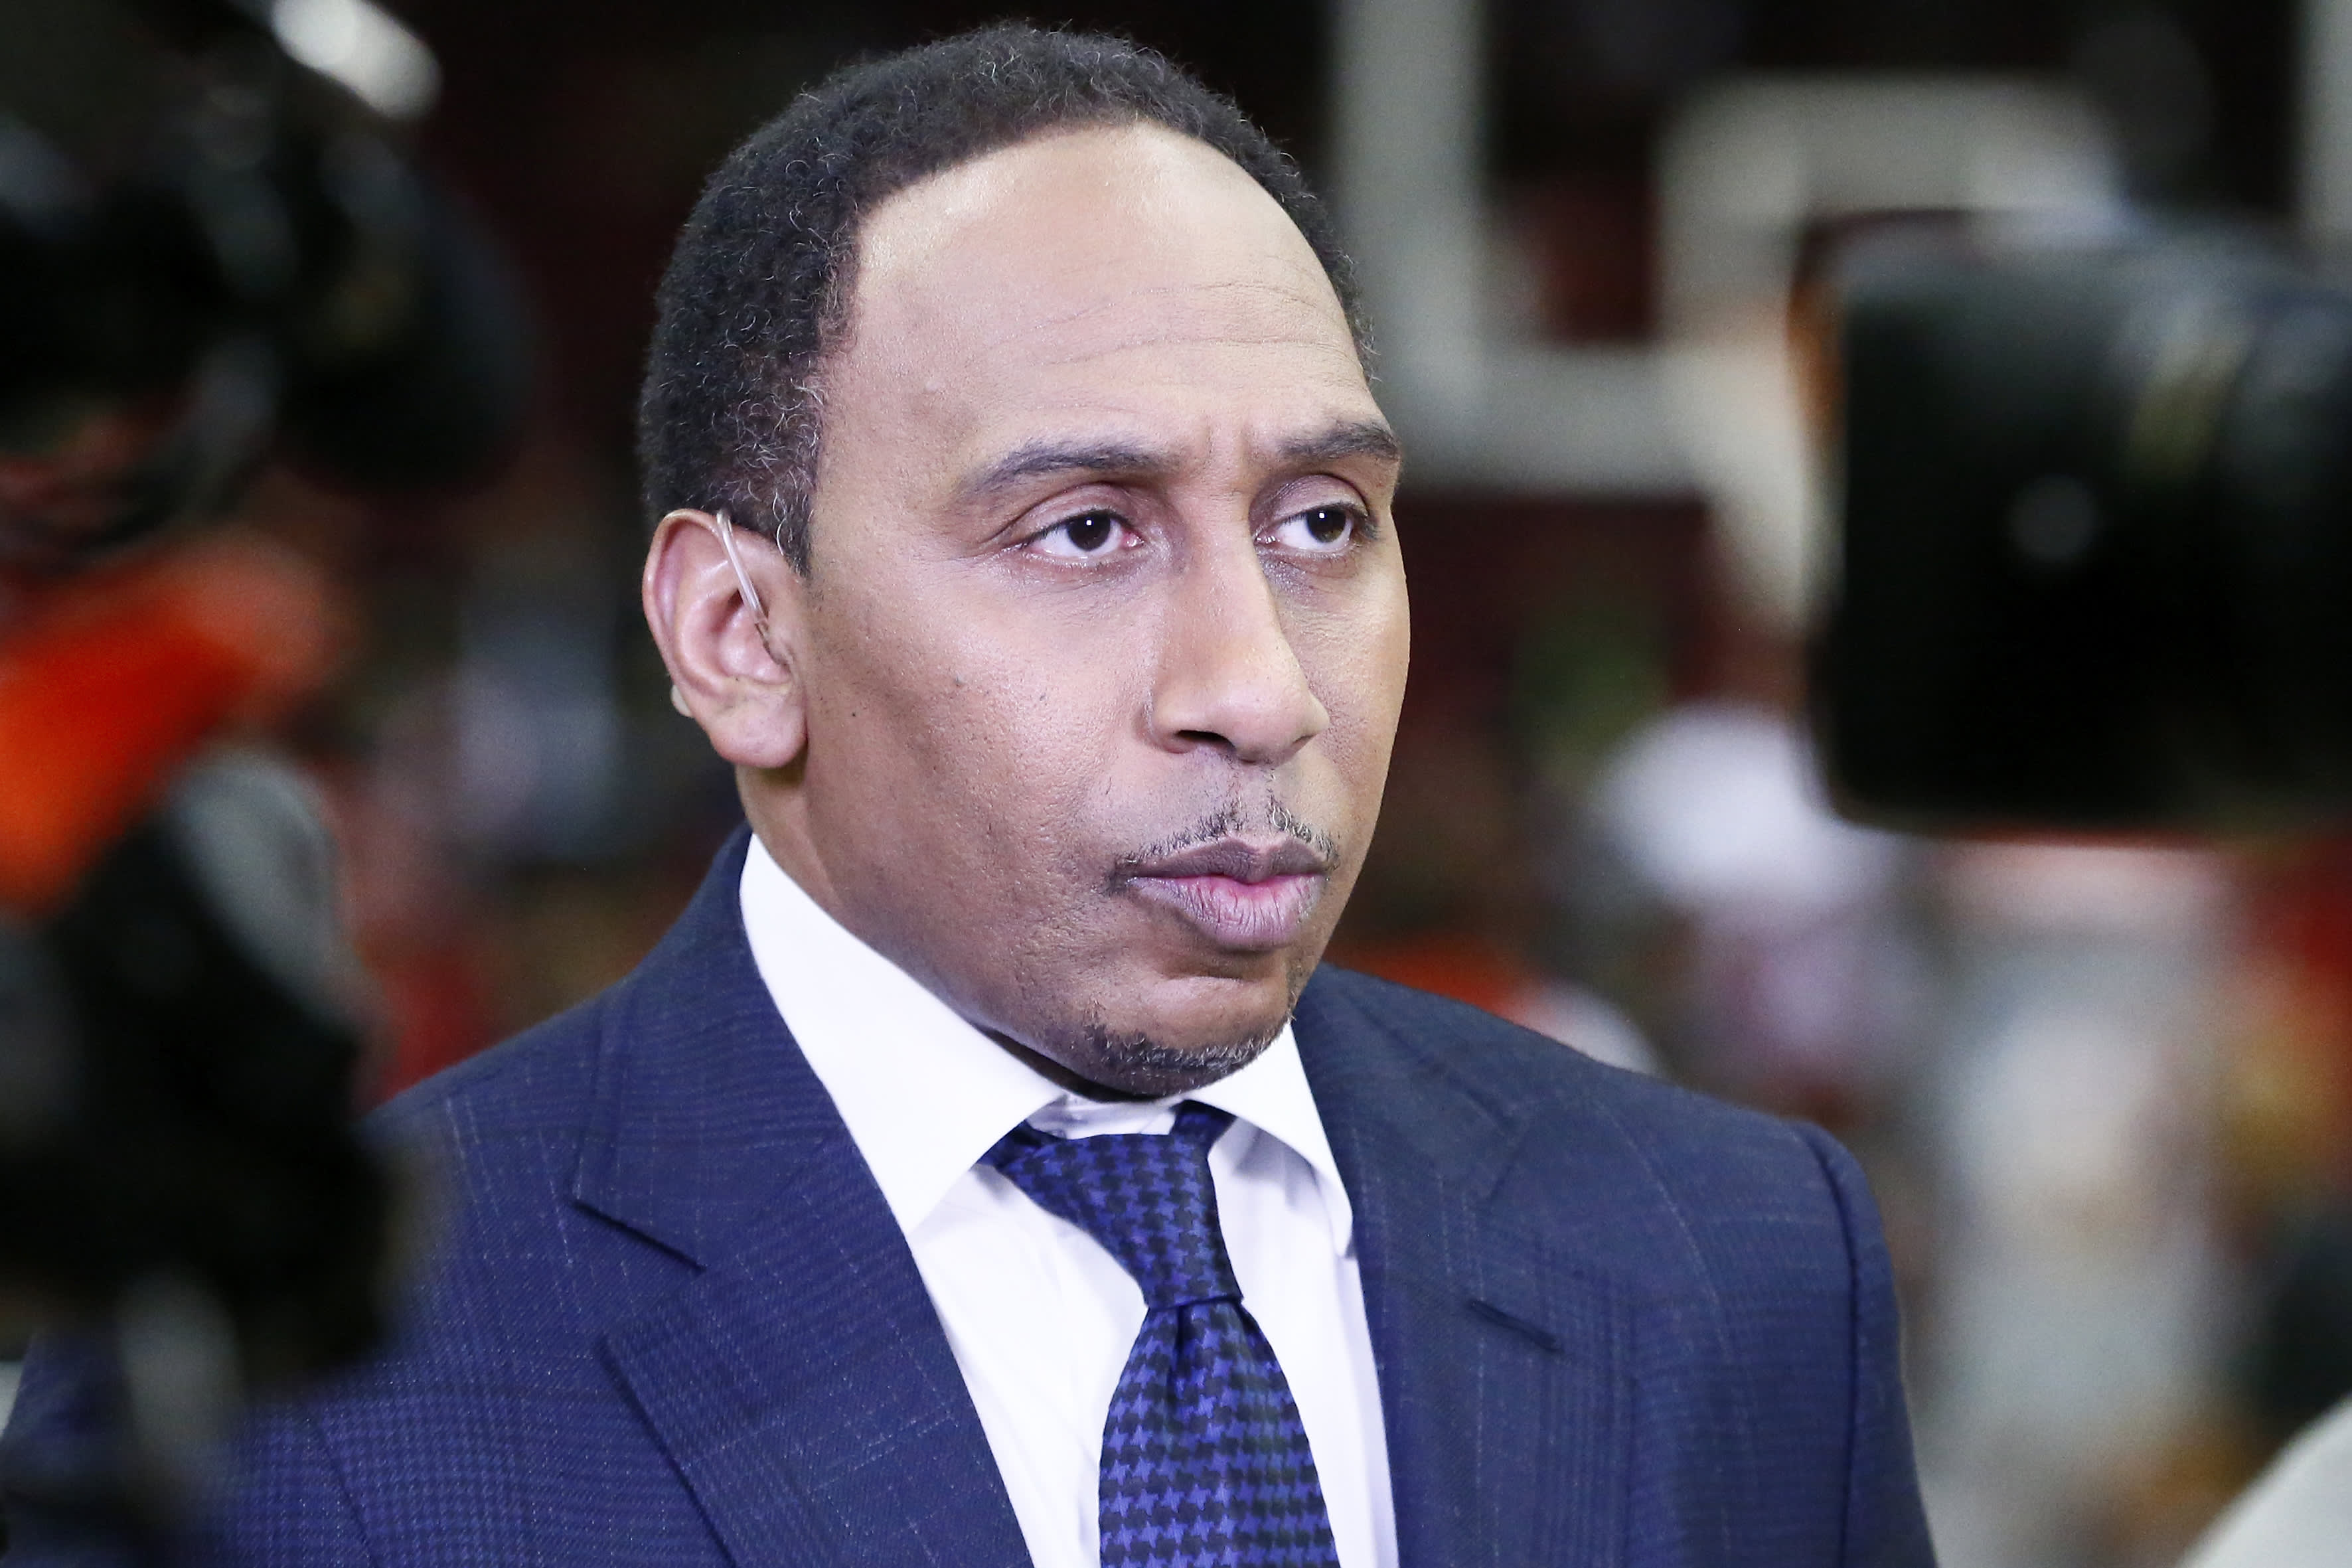 Stephen A Smith wearing a suit and checkered tie